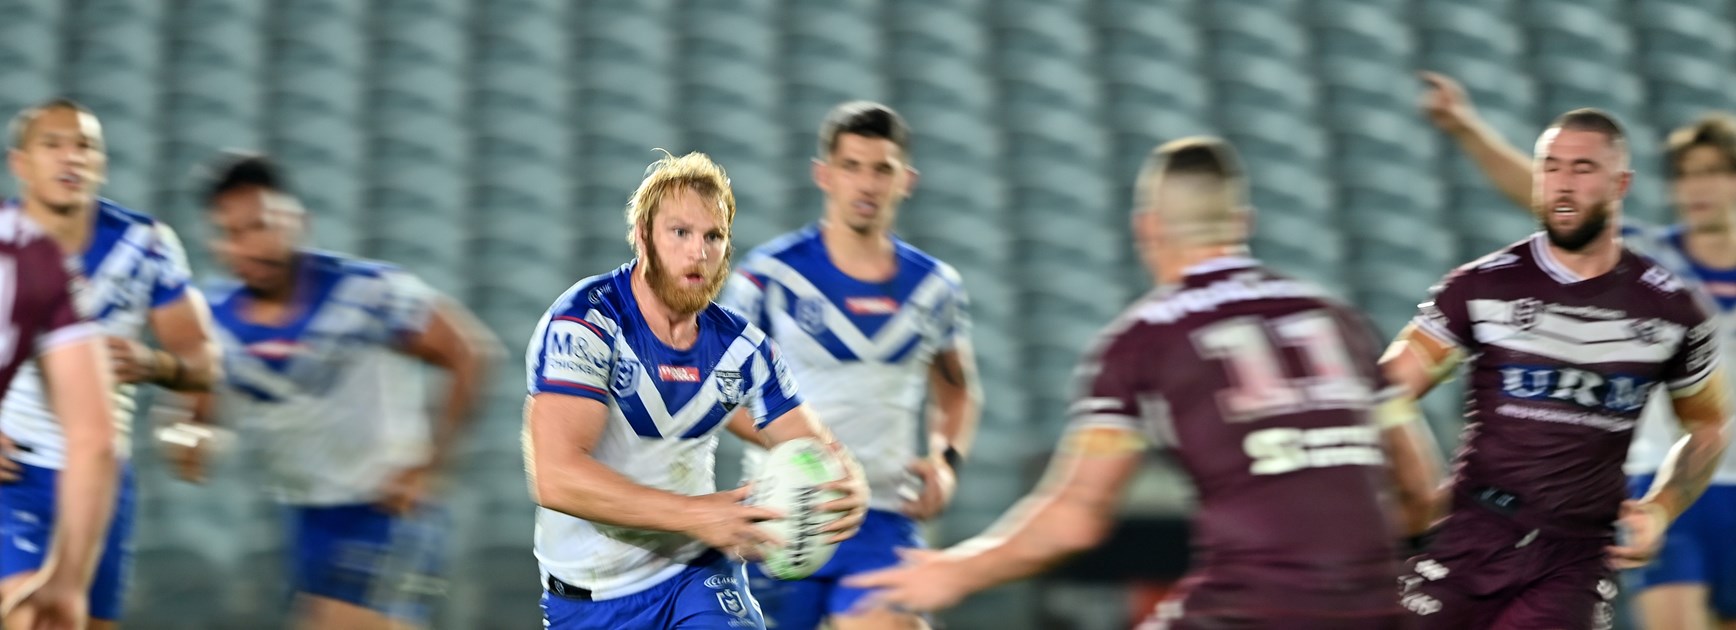 NRL Round 3 snapshot + Dally M votes: Rugby league back in all its glory